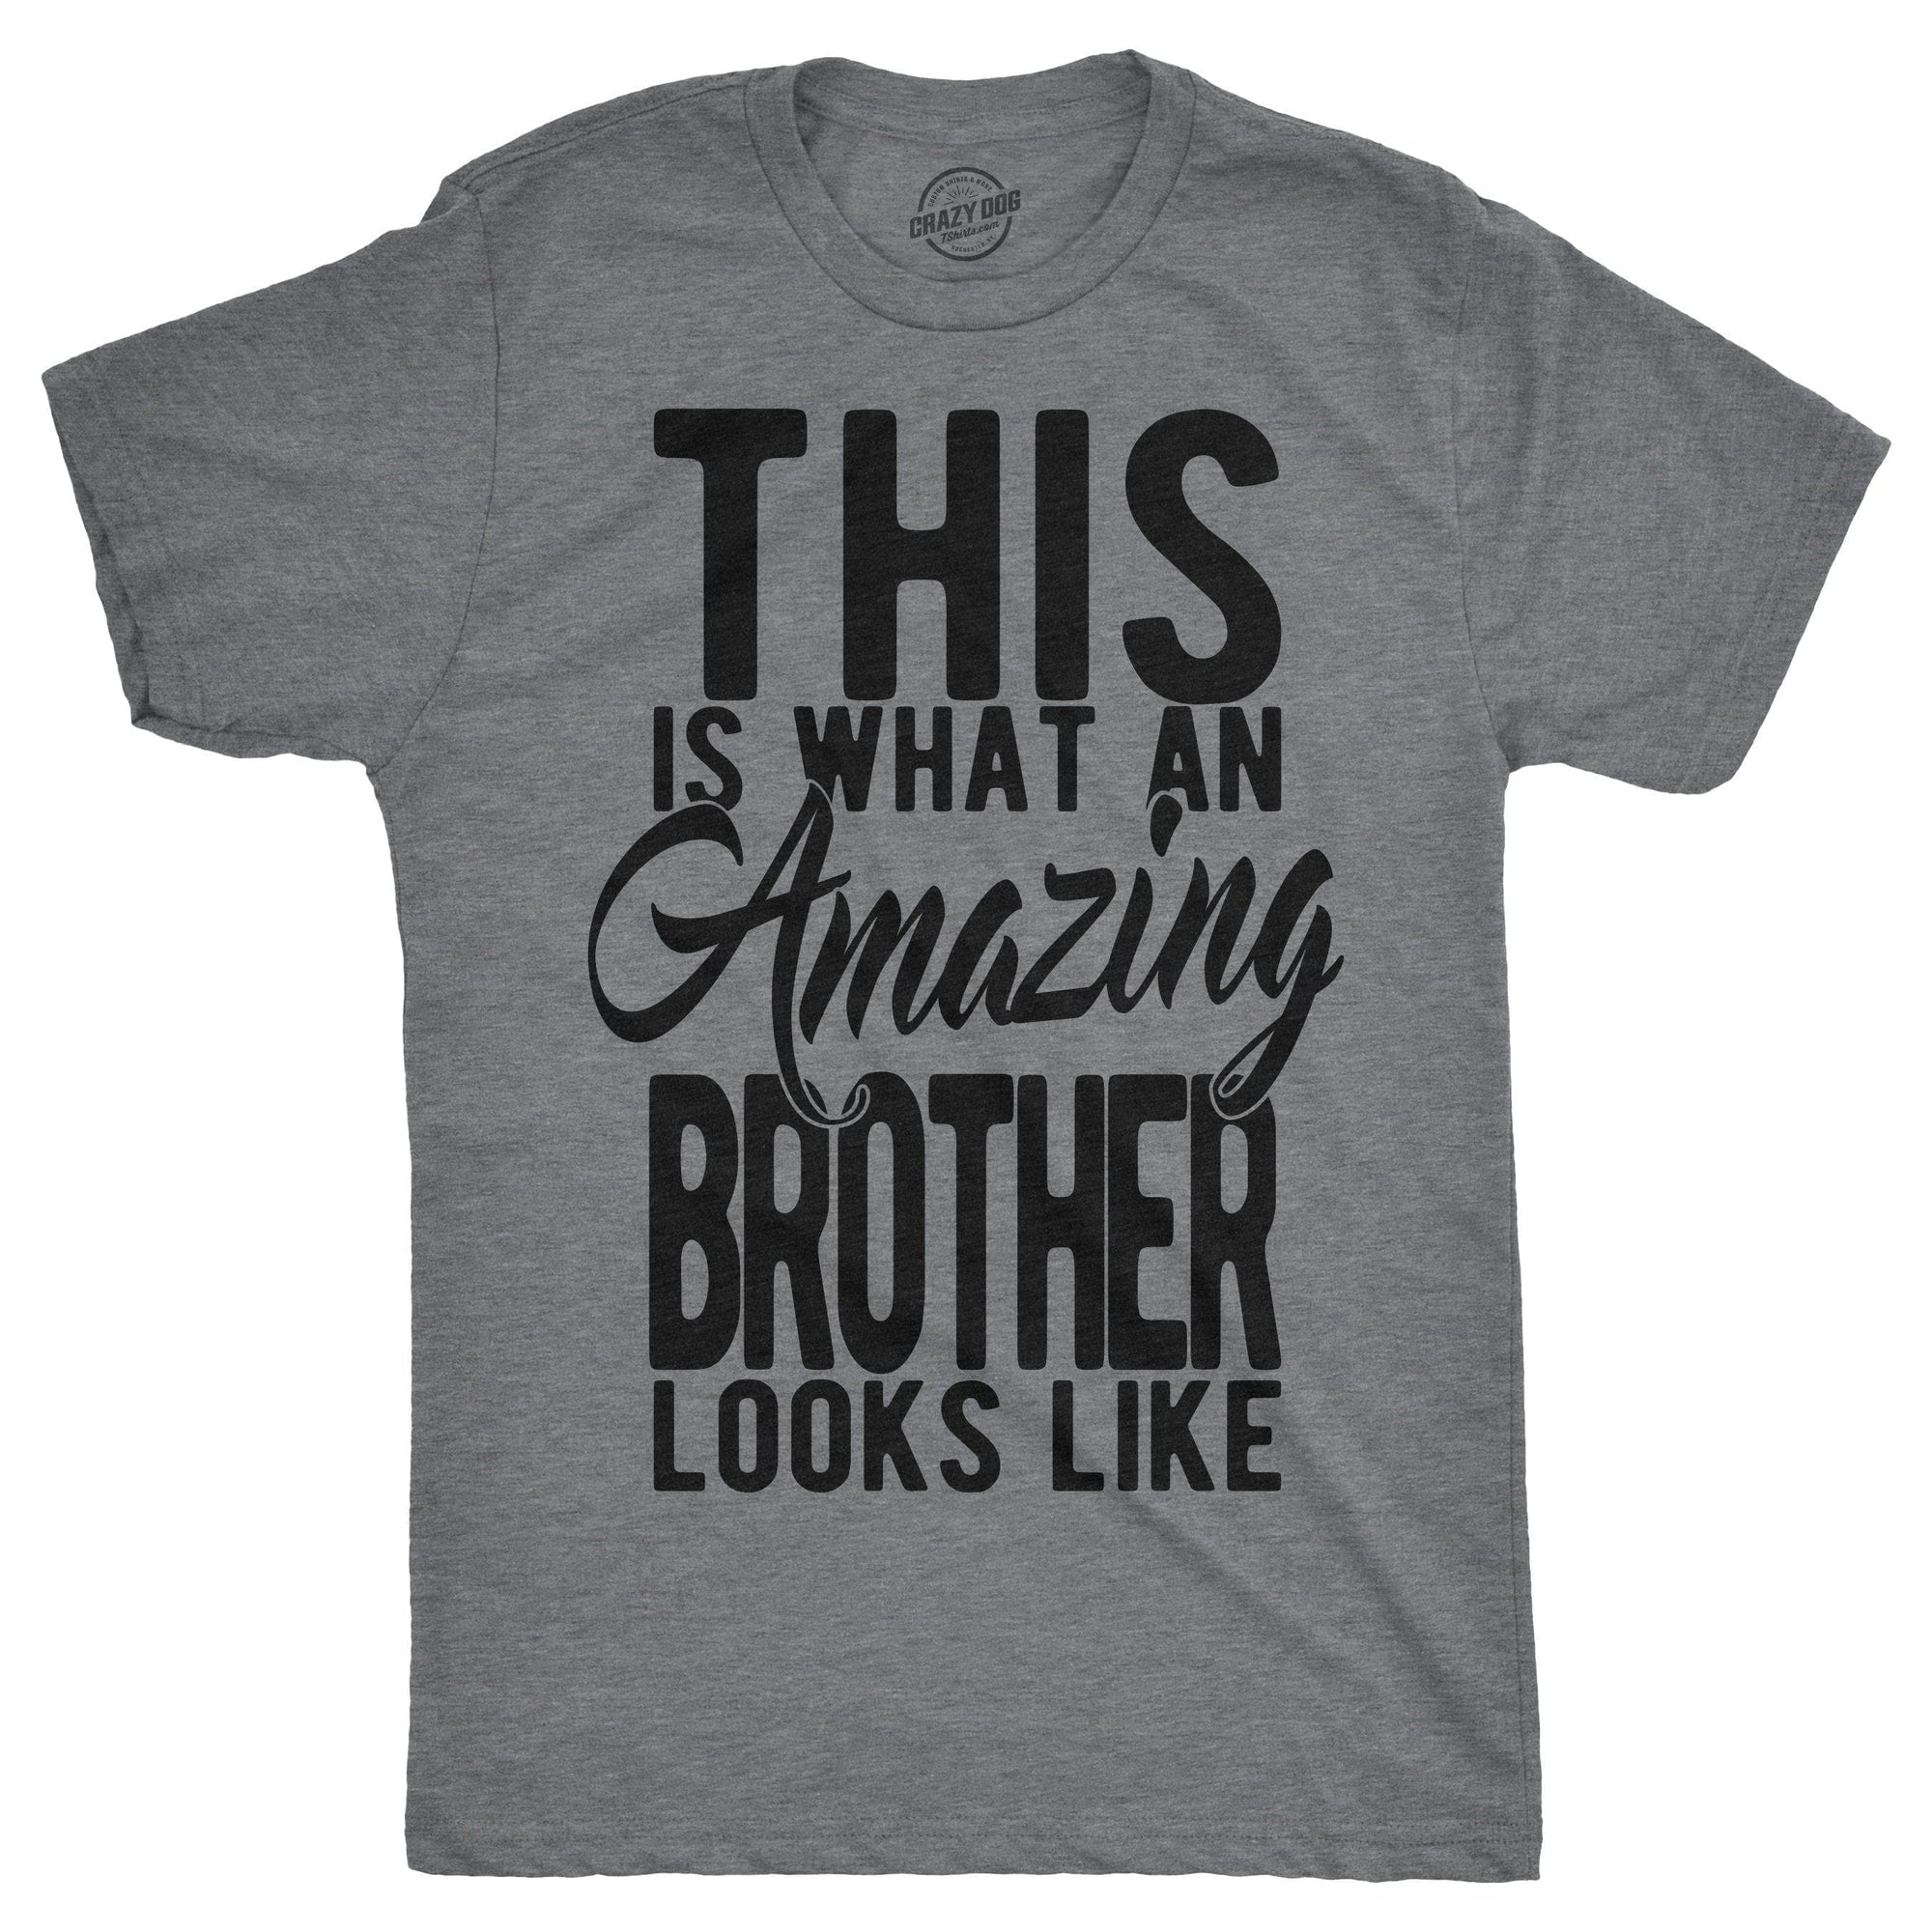 This Is What An Amazing Brother Looks Like Men's Tshirt  -  Crazy Dog T-Shirts